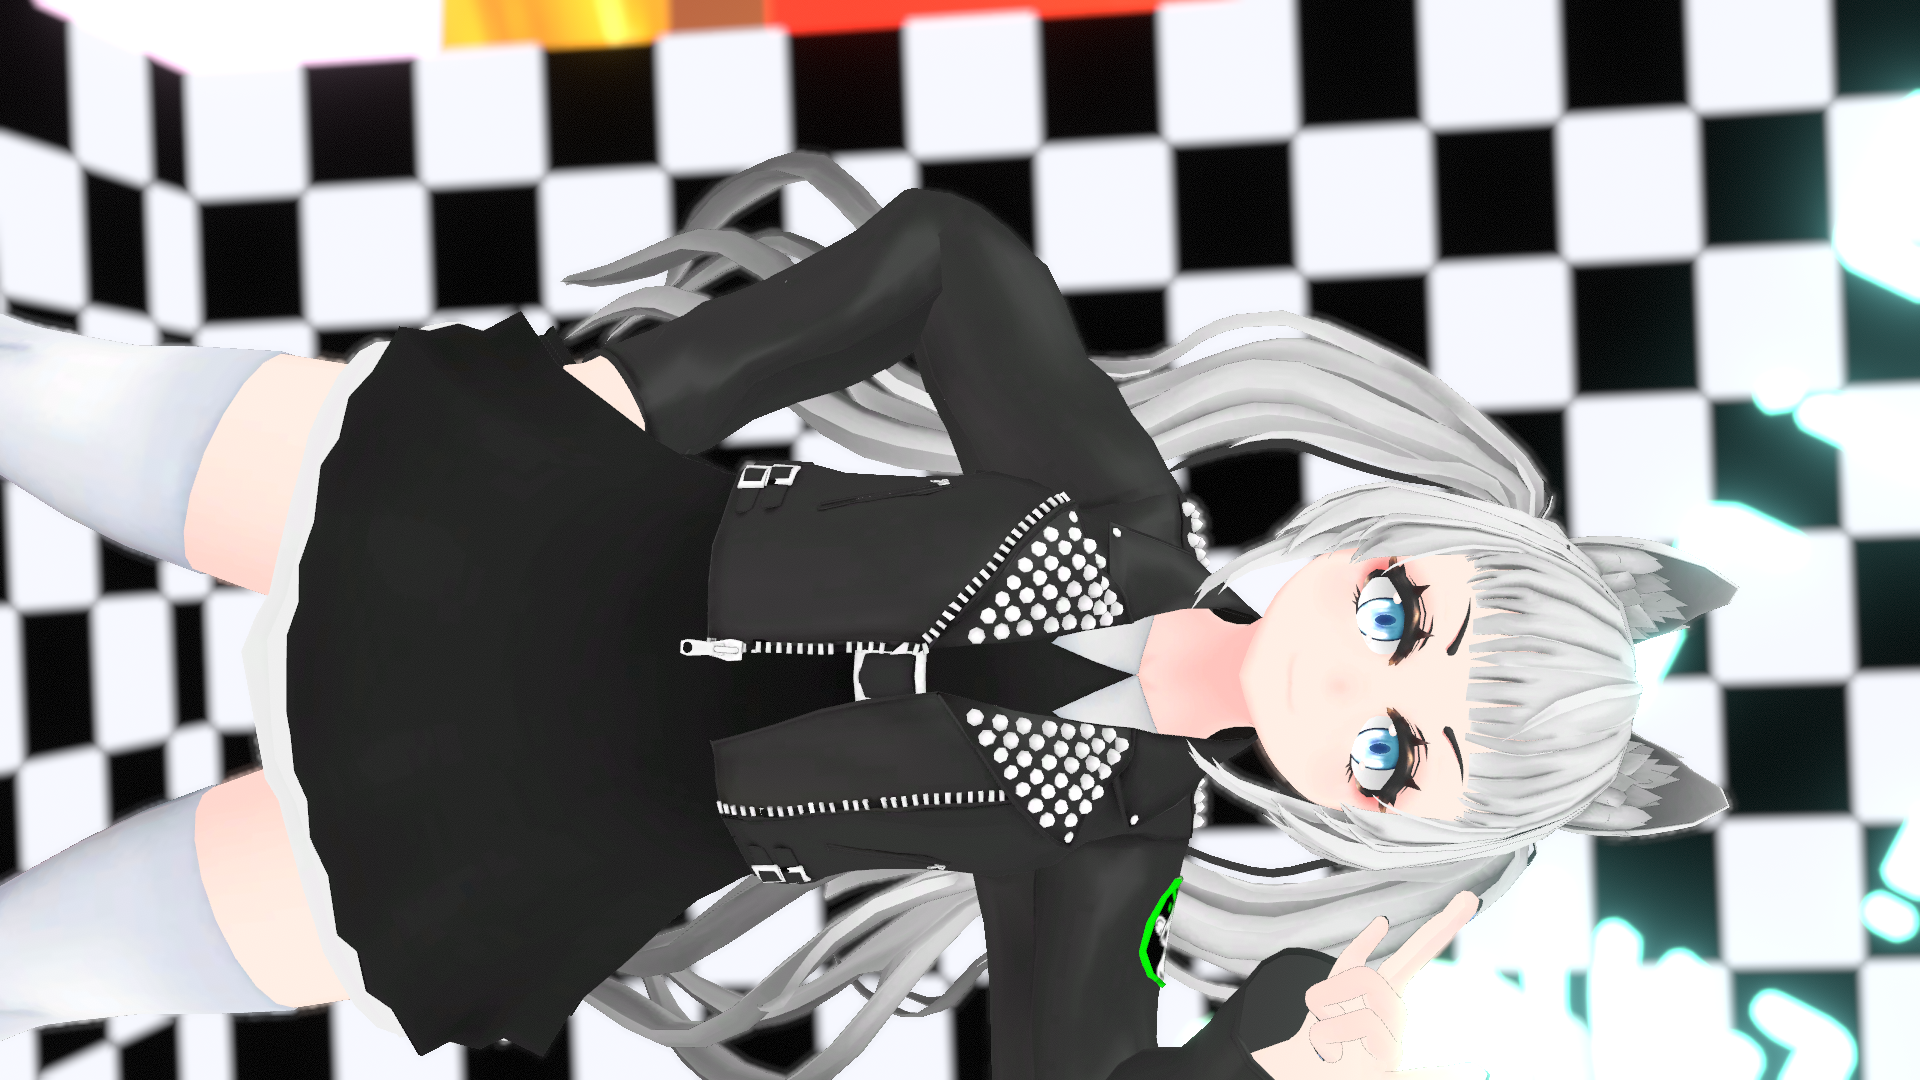 VRChat_1920x1080_2021-12-05_05-08-19.051.png